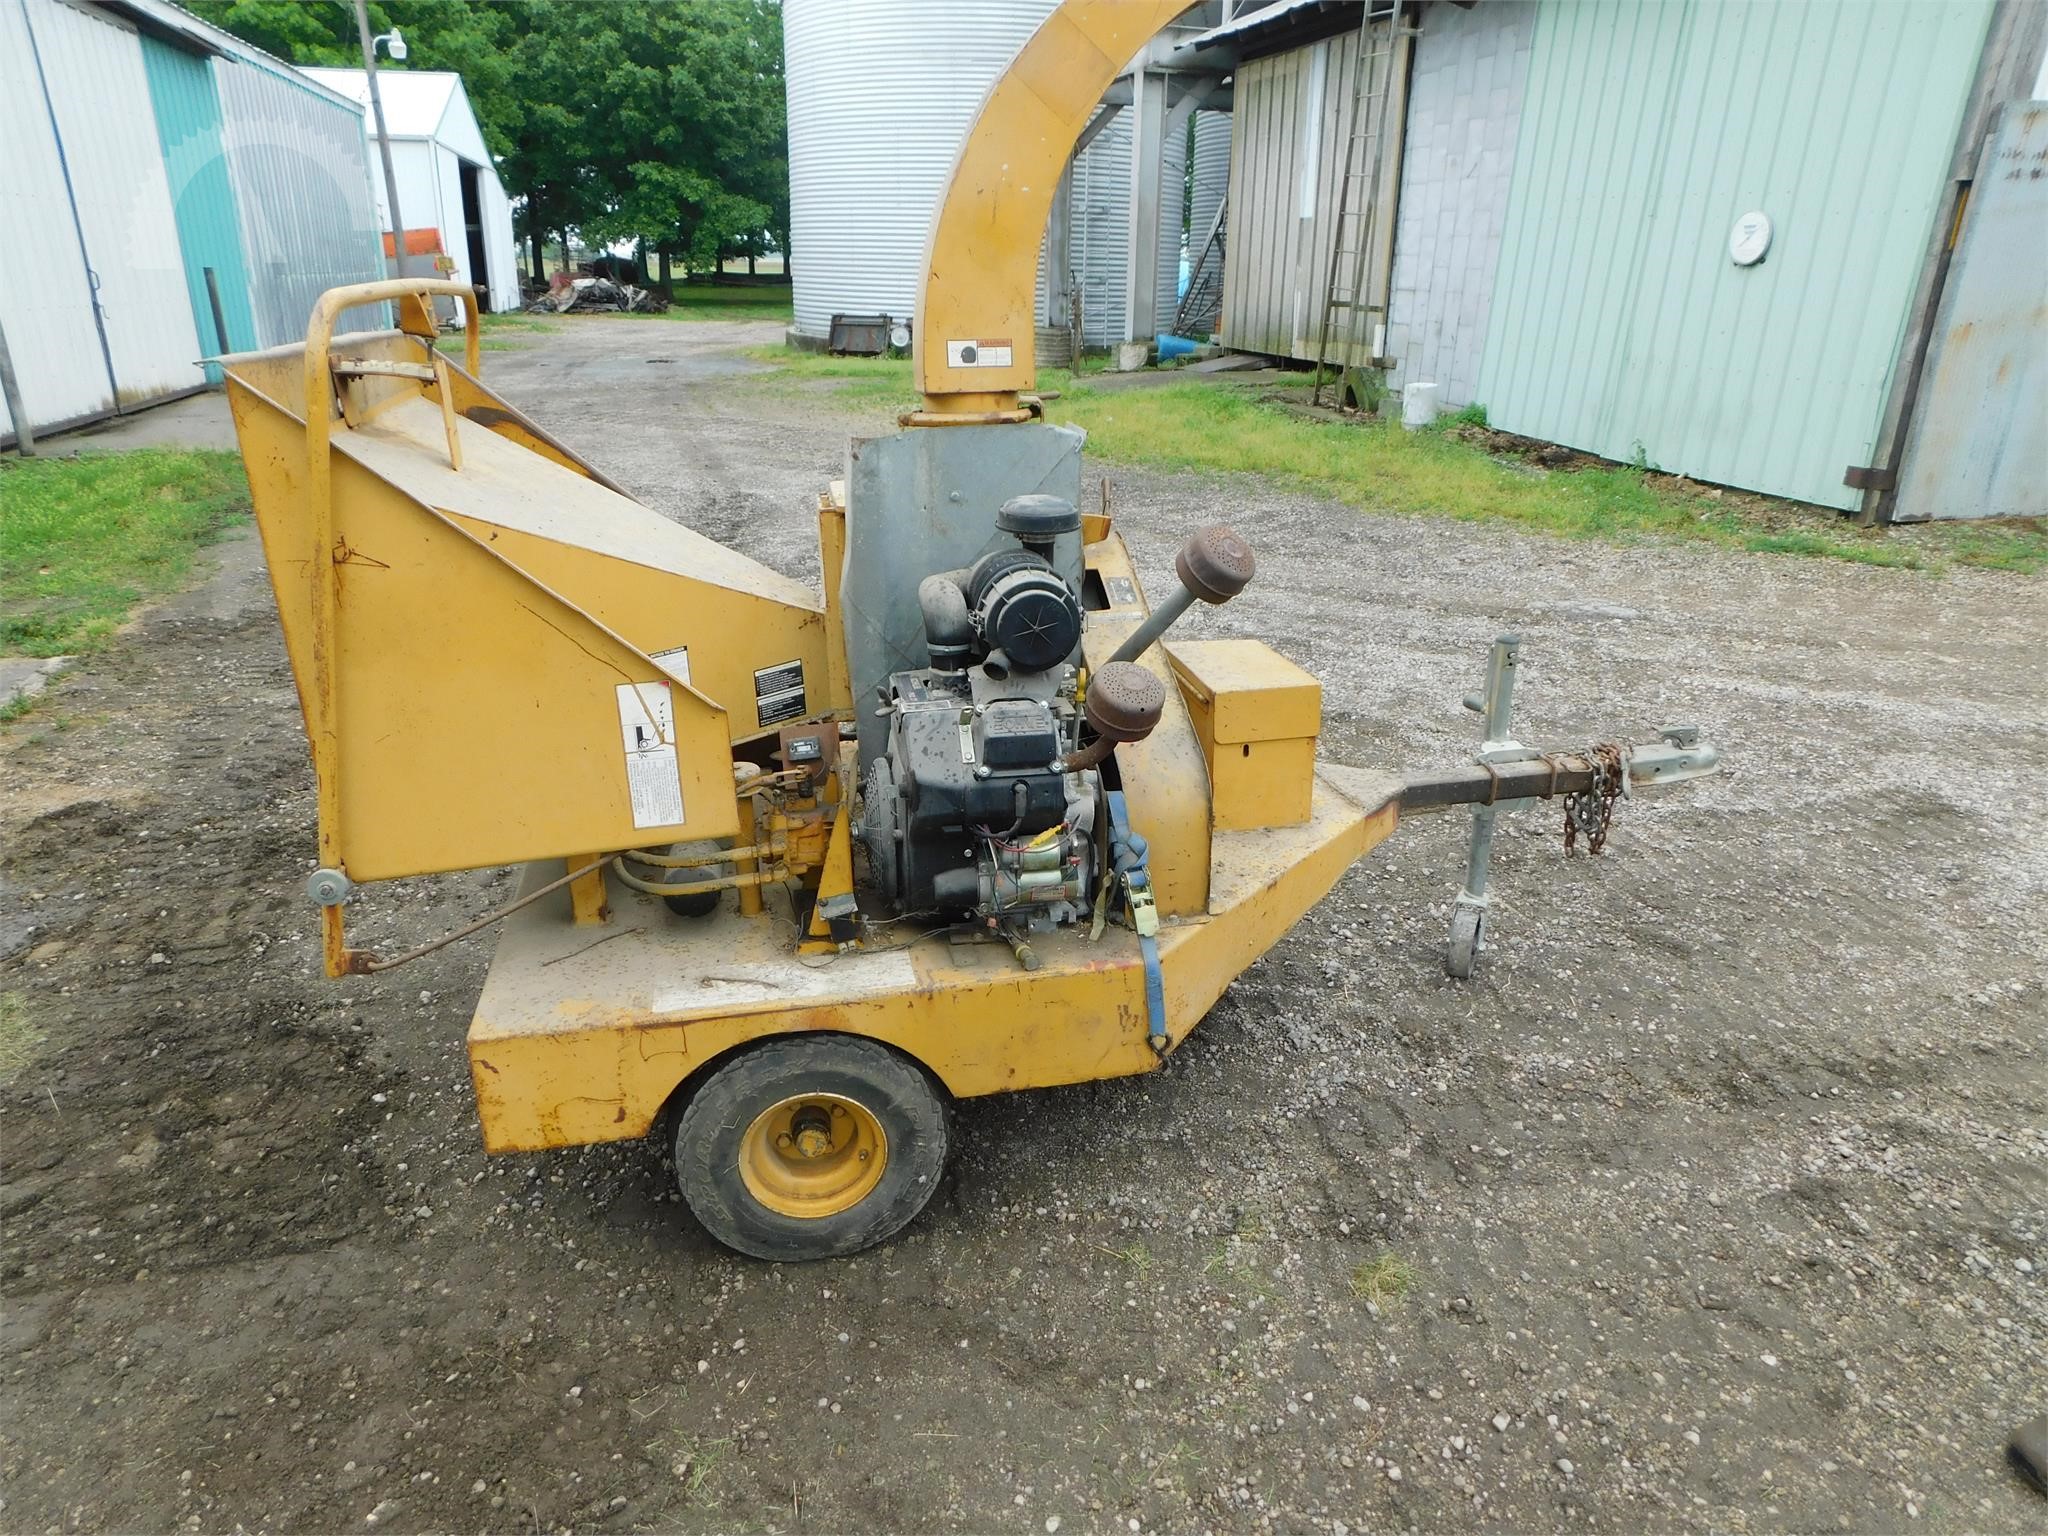 Vermeer Wood Chippers Forestry Equipment Auction Results 31 Listings Auctiontime Com Page 1 Of 2